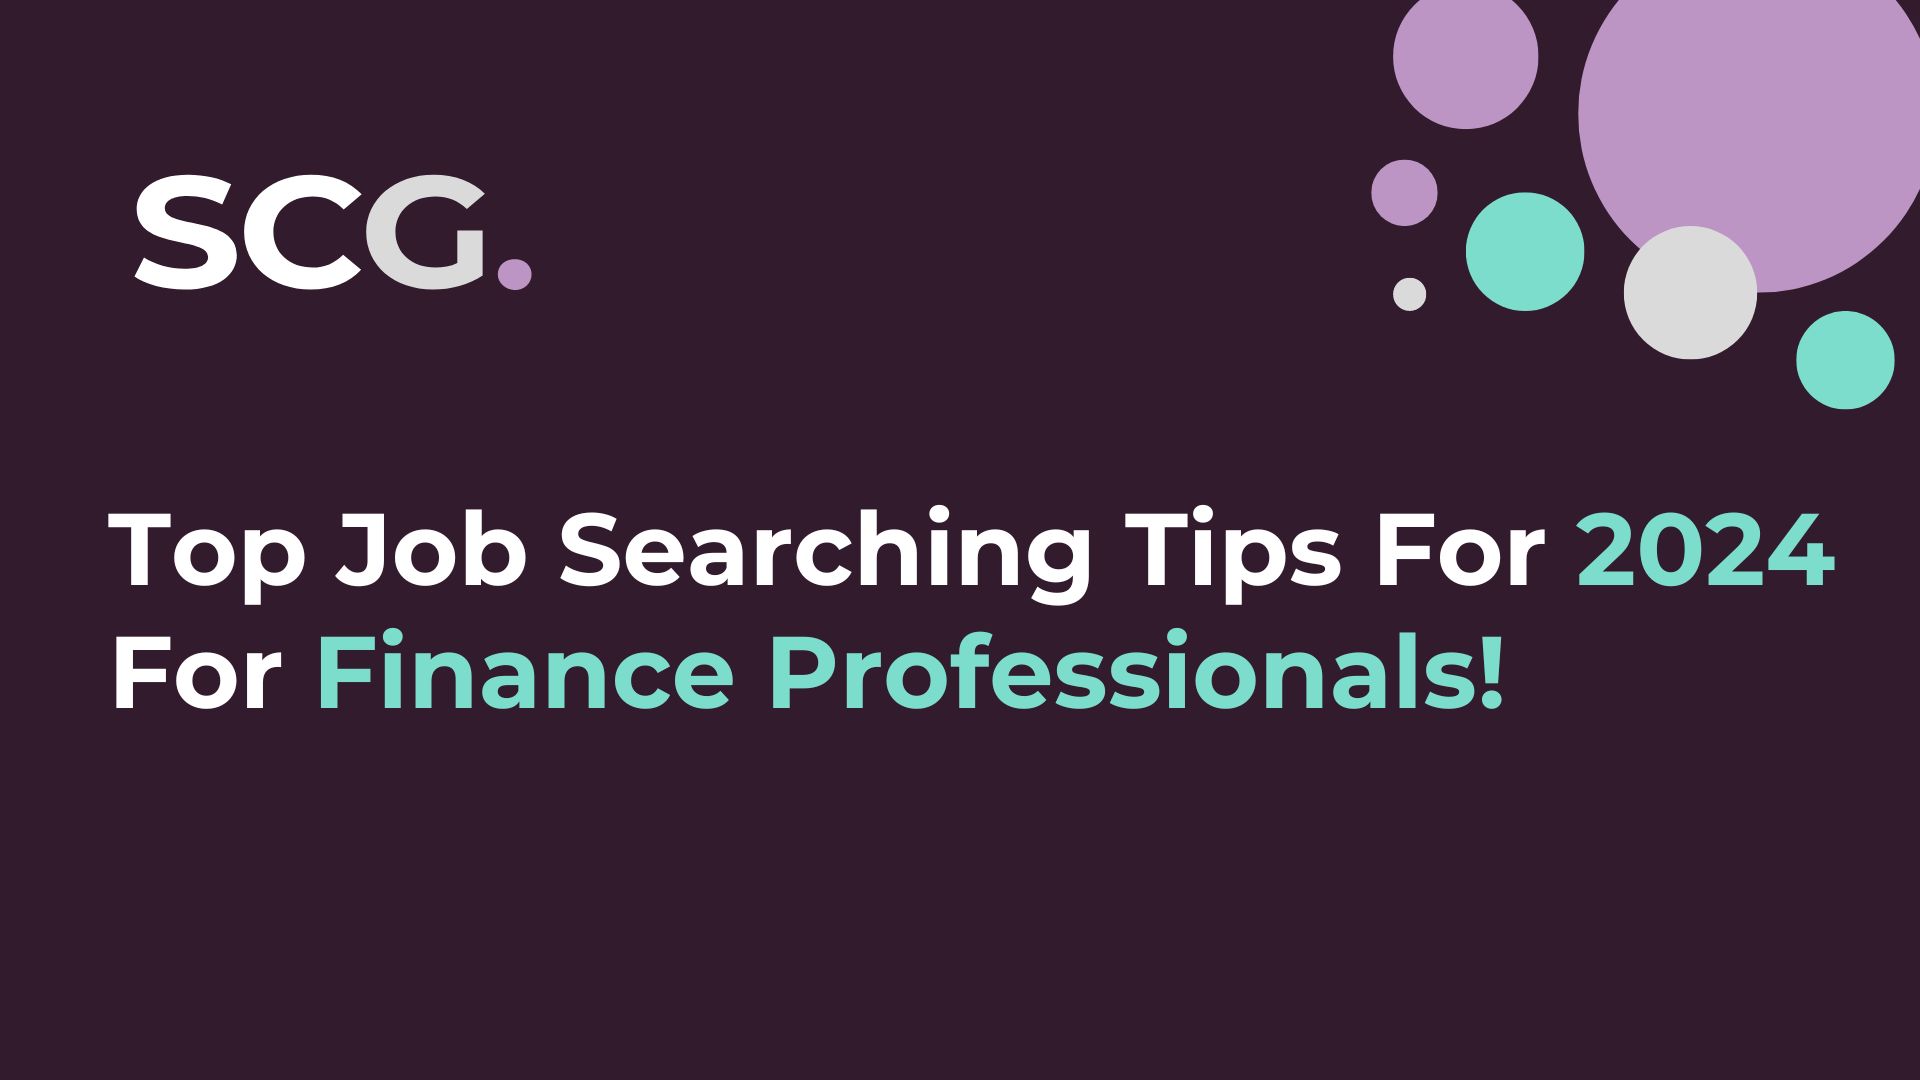 Top Job Searching Tips For 2024 - For Finance Professionals